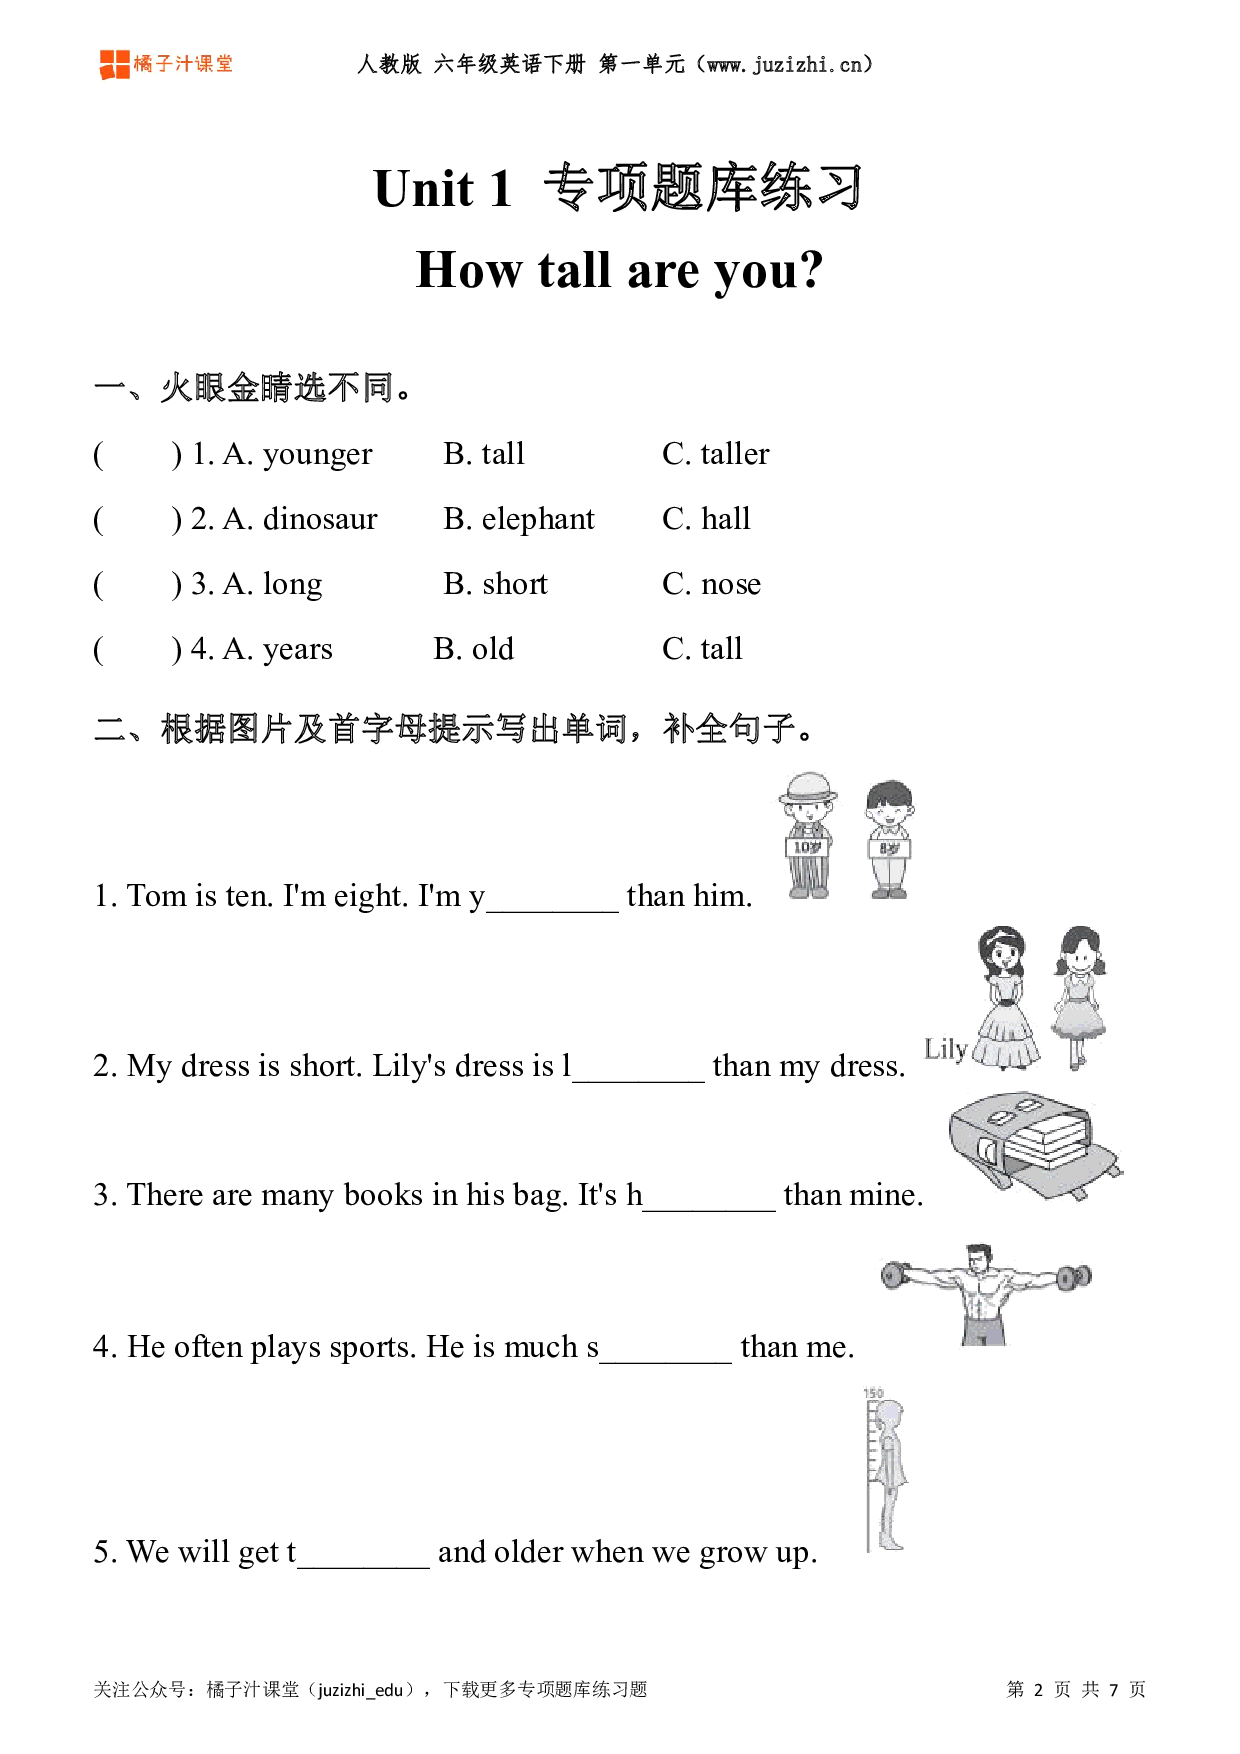 【PEP英语】六年级下册Unit 1《How tall are you?》专项题库练习